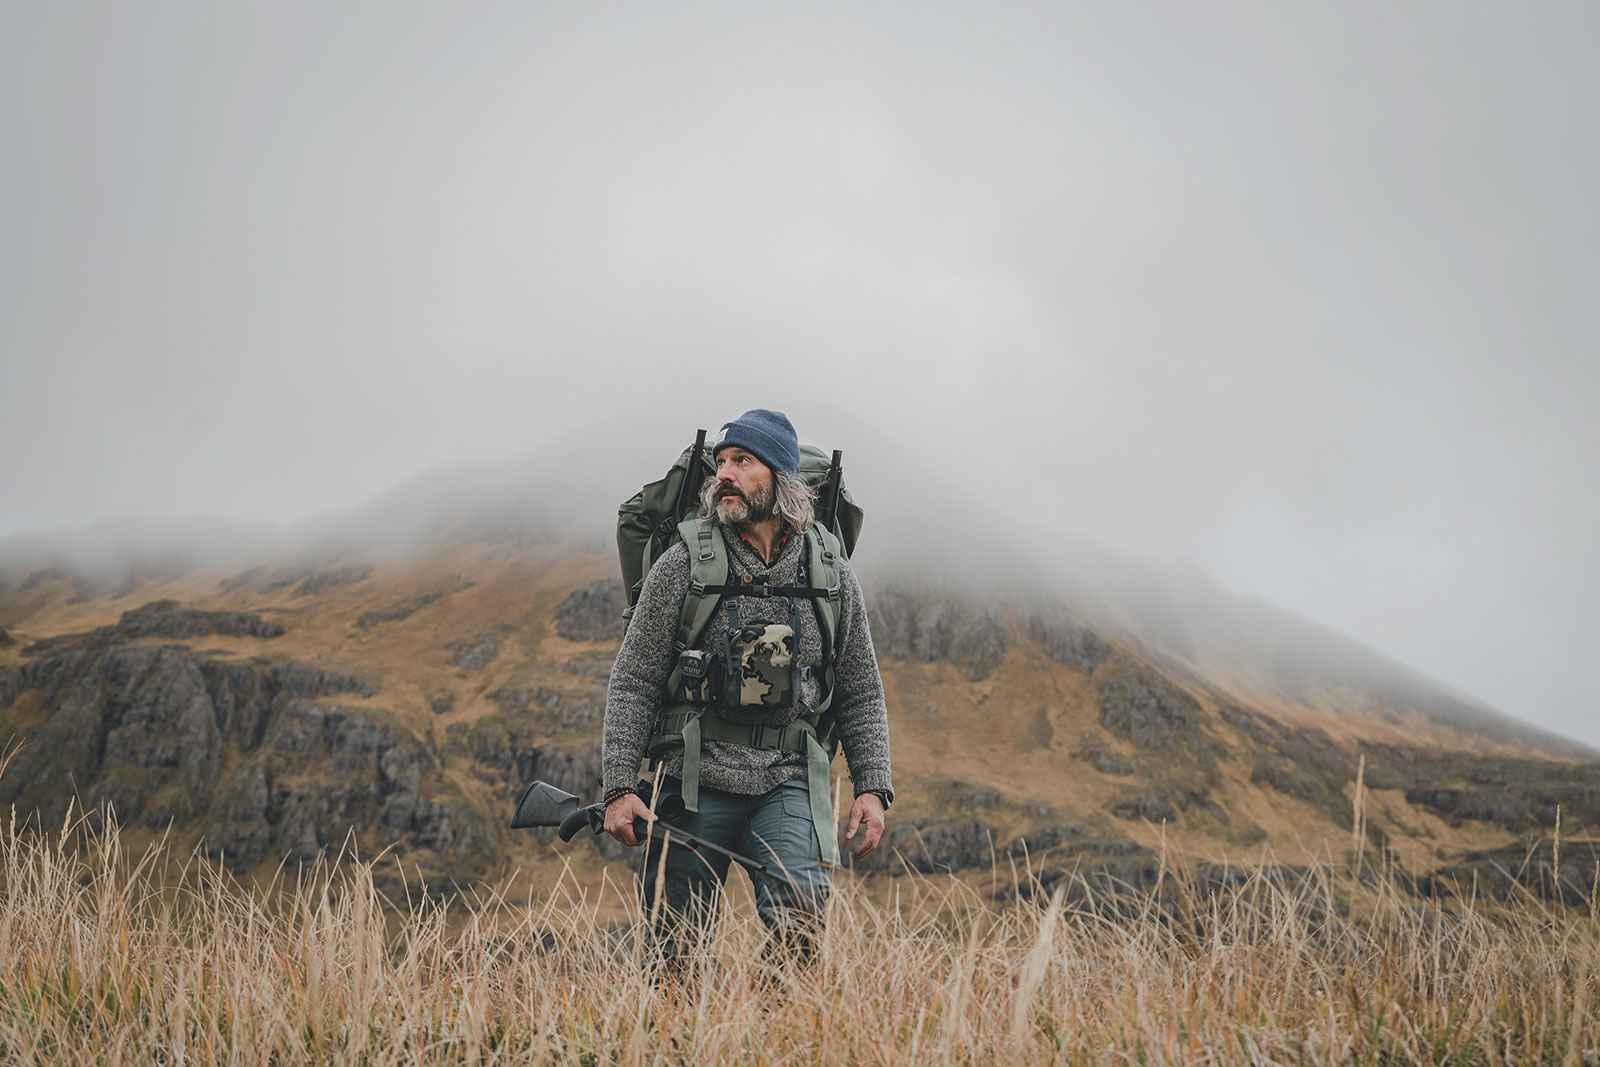 Donnie Vincent explores the vast terrain and wilderness of Adak Island Alaska while hunting caribou, ptarmigan and sea ducks.